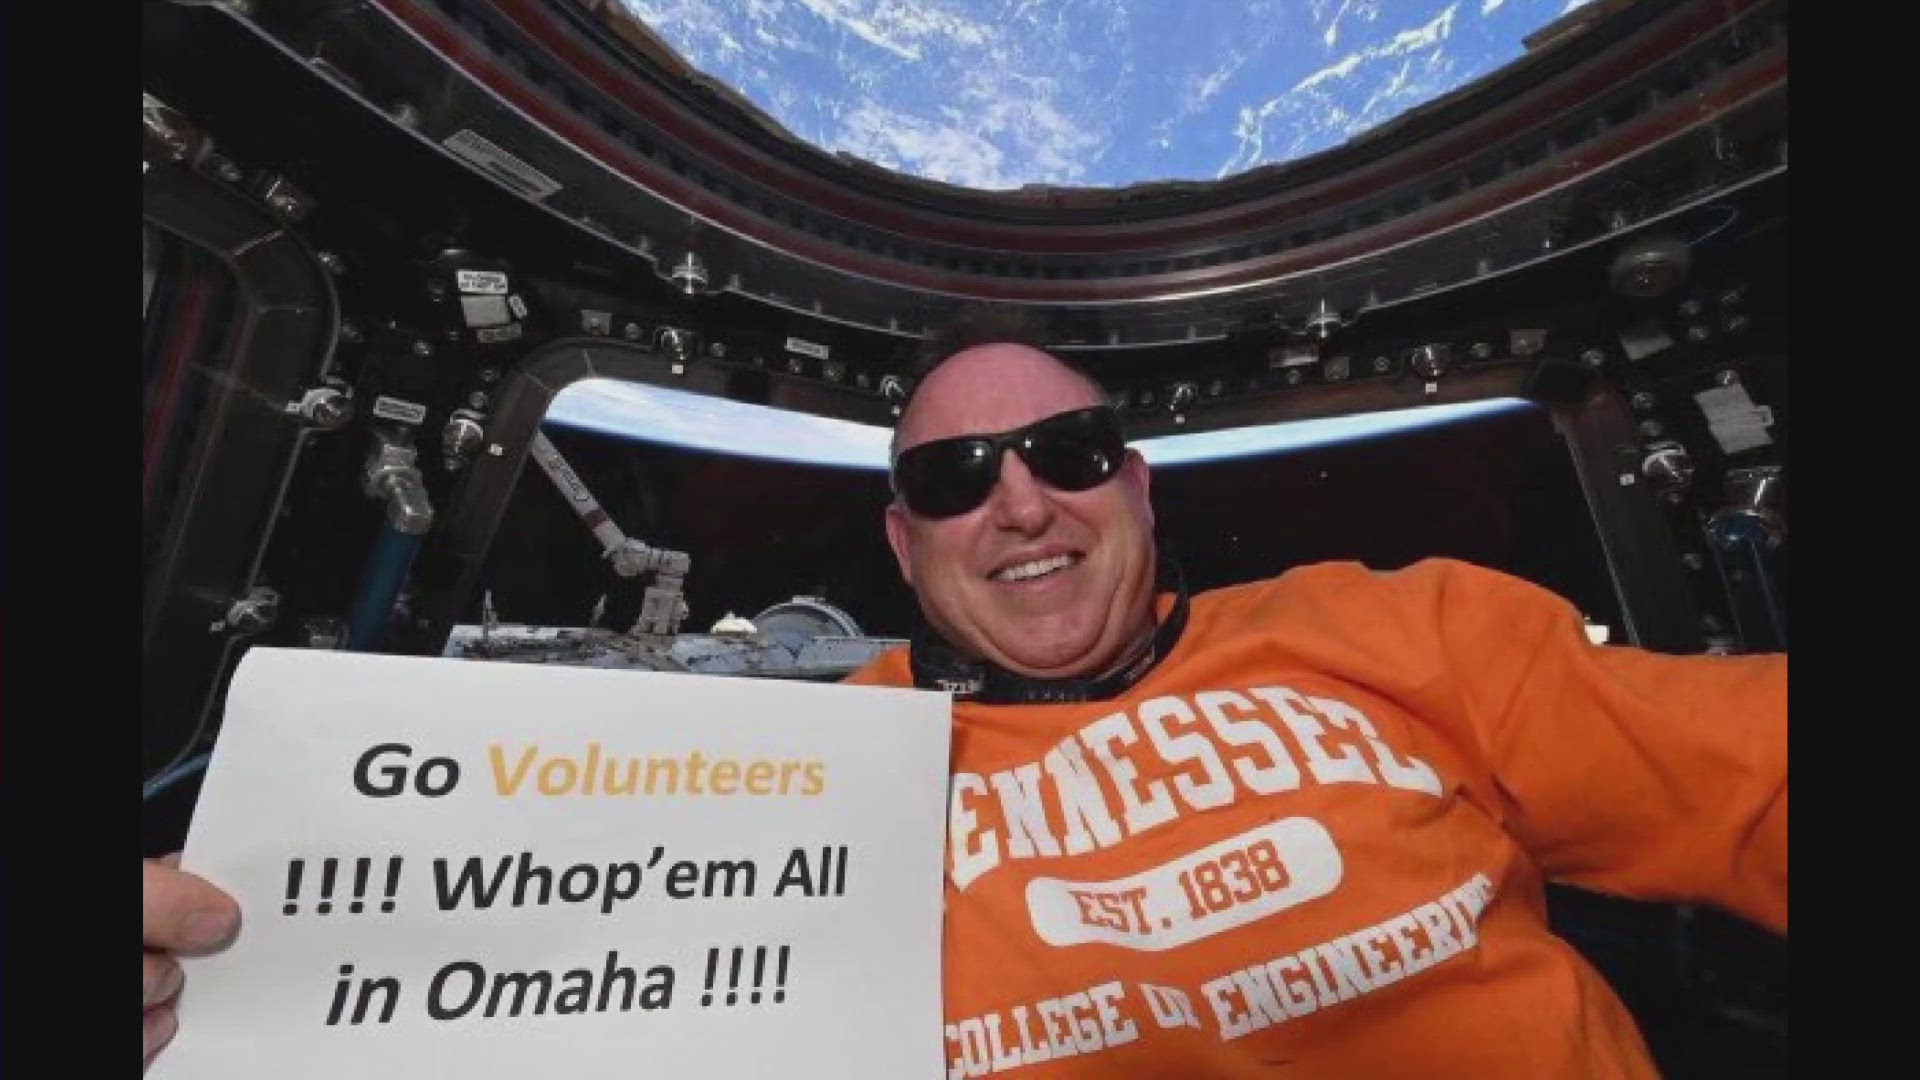 UT alum Butch Wilmore is on the International Space Station and is cheering on the vols.